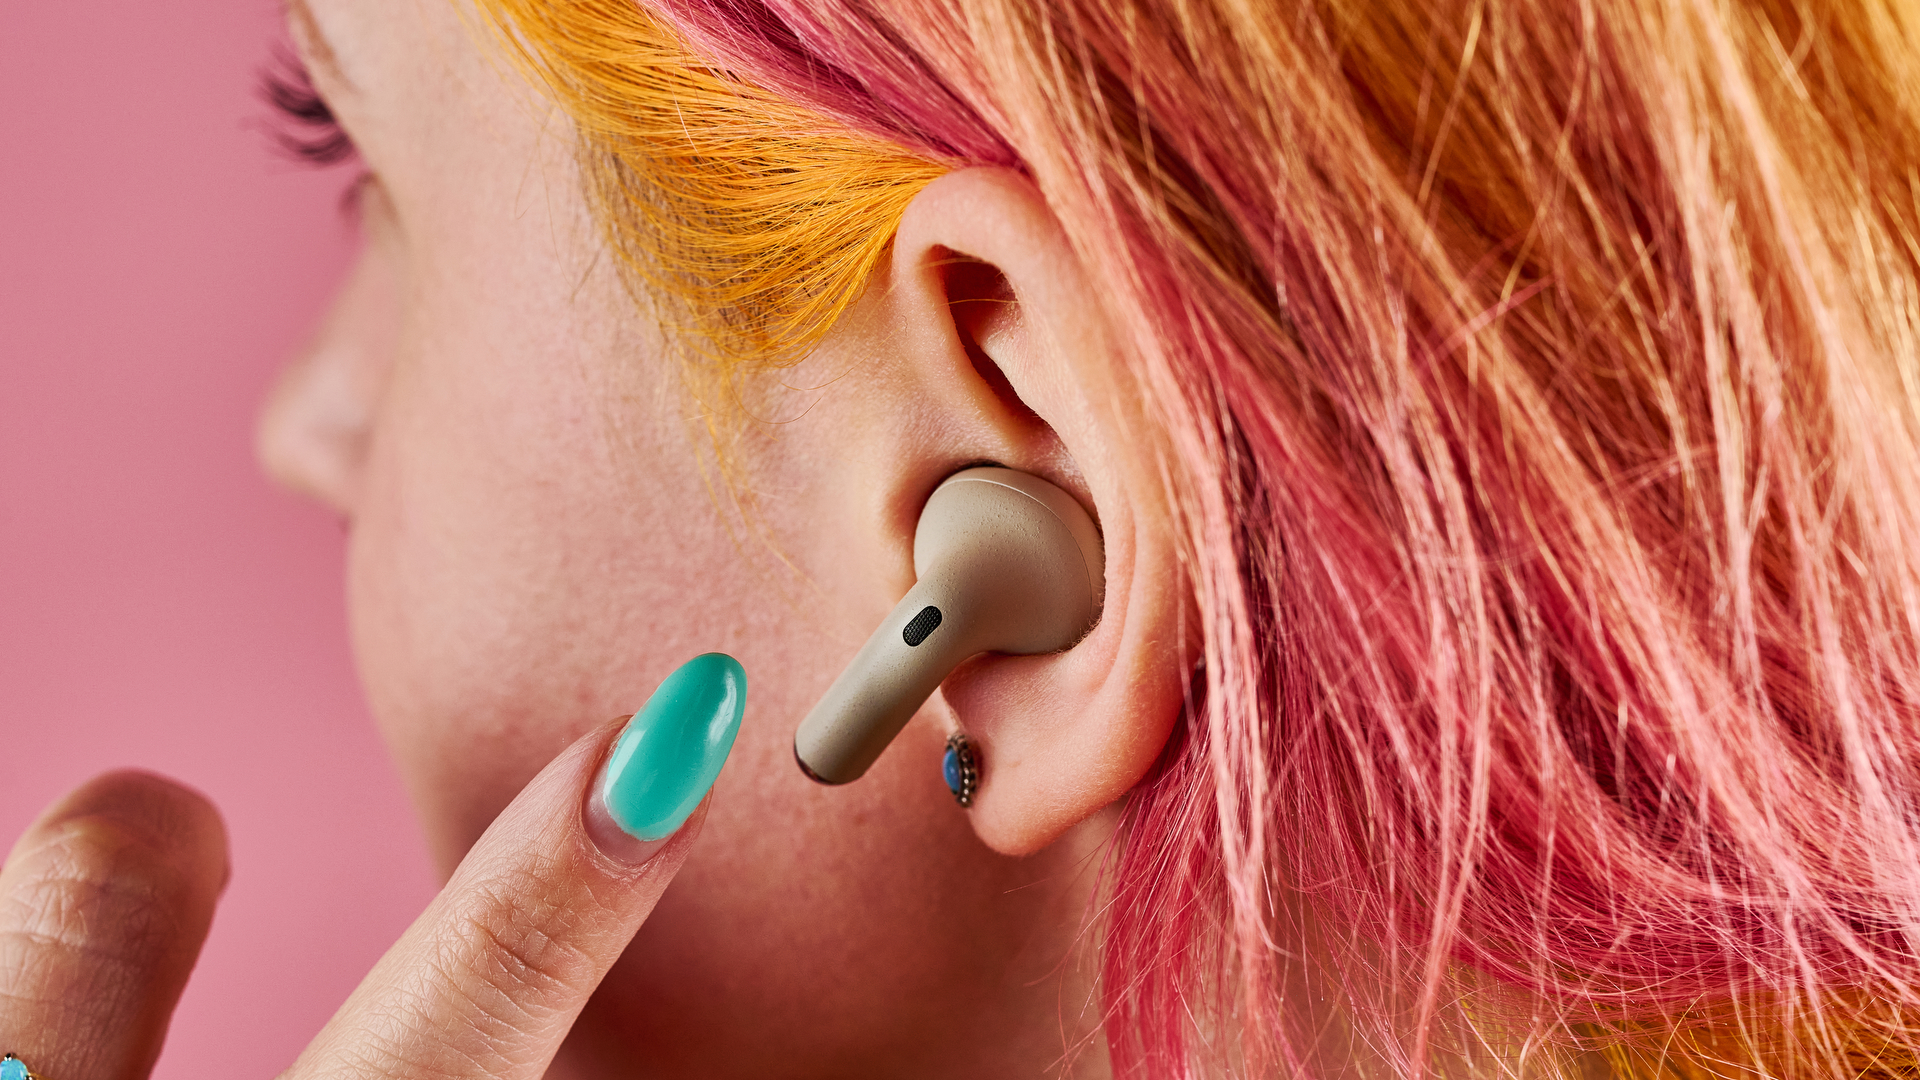 A close up side profile of a woman with orange and pink hair, she has one of the Motorola Moto Plus earbuds in her ear, and her finger is hovering ready to press the touch control area.